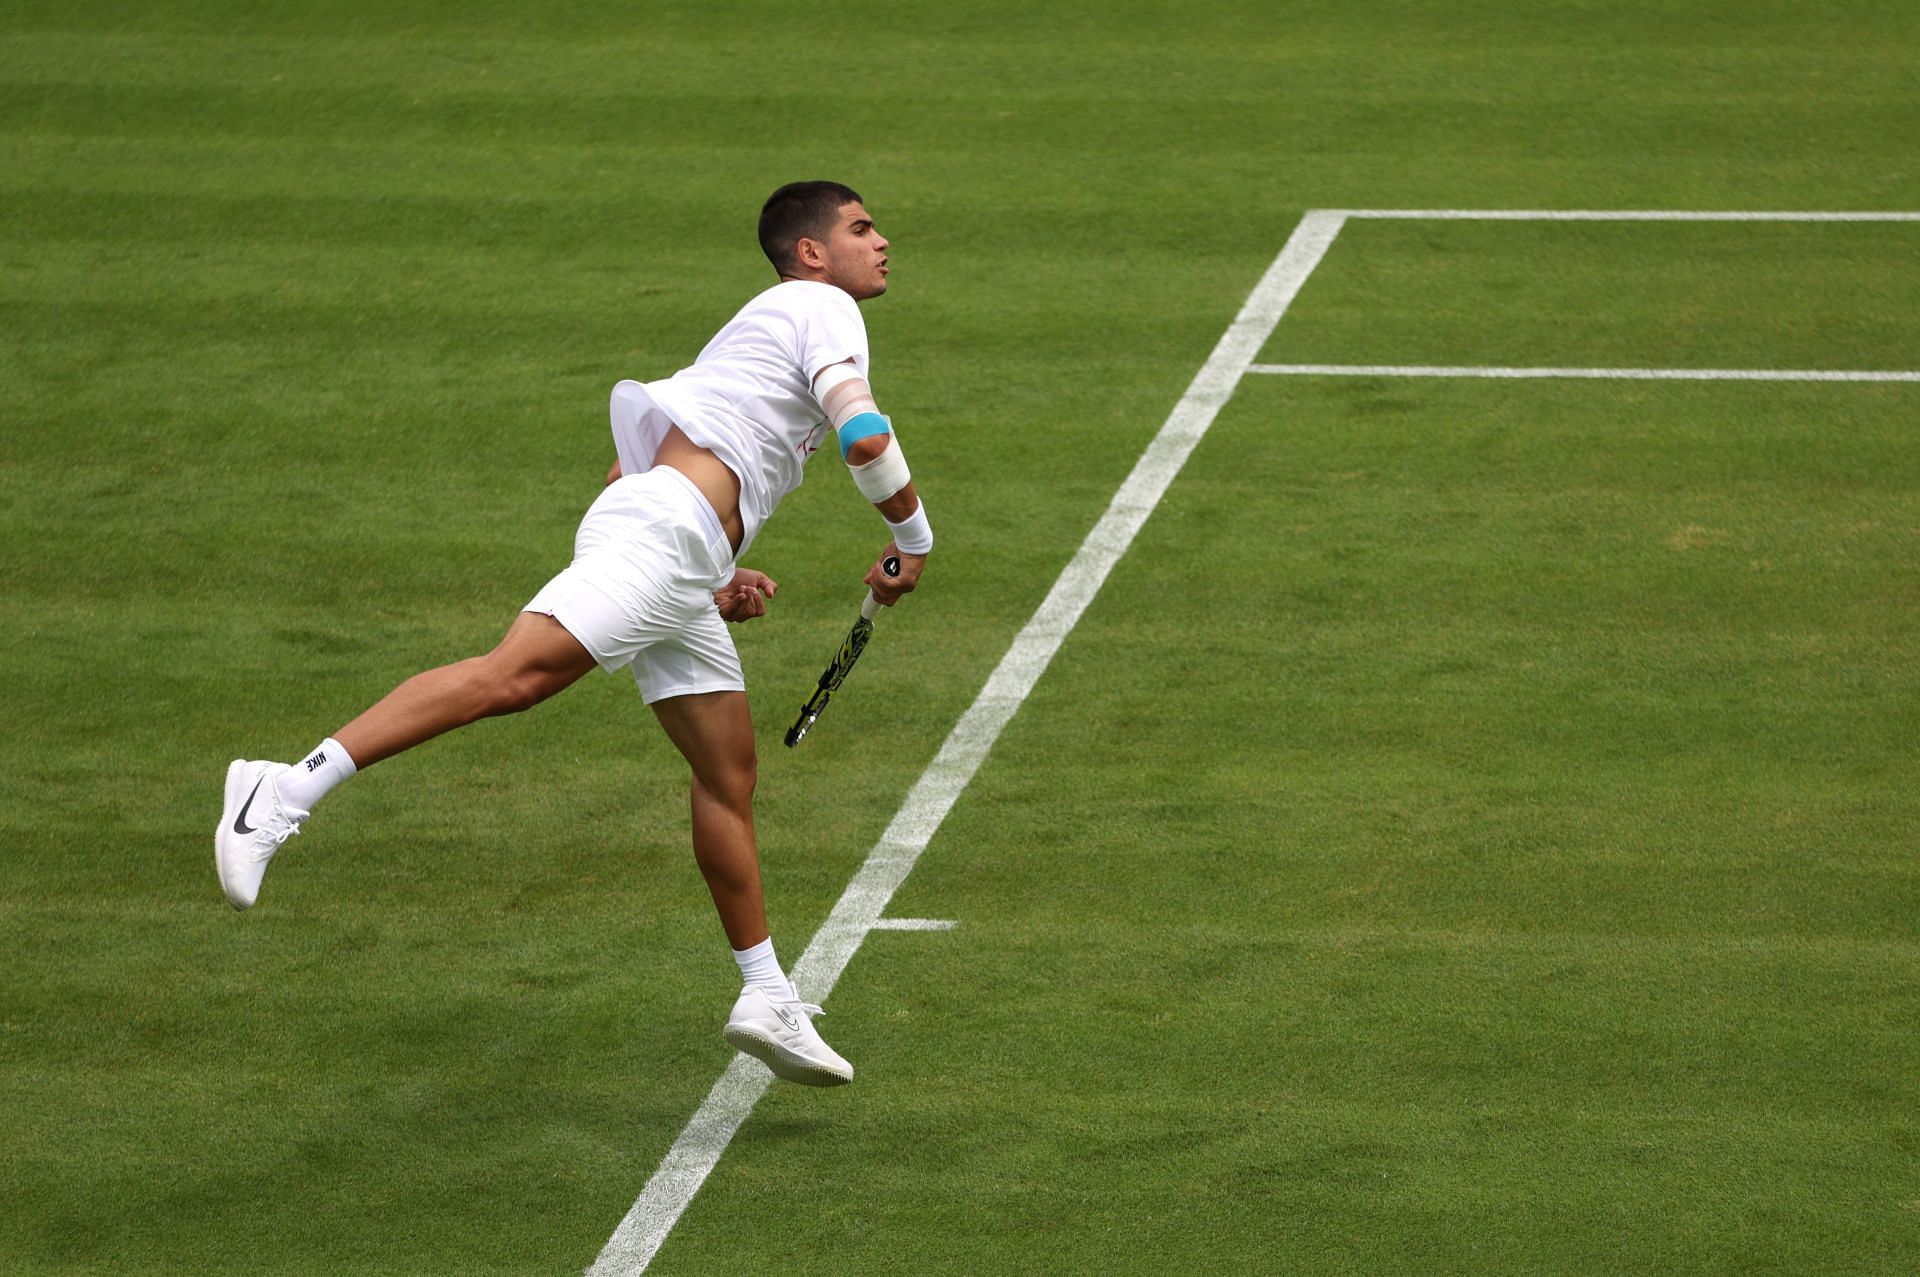 Carlos Alcarazs next match Opponent, venue, live streaming and schedule Wimbledon 2022, Round 1